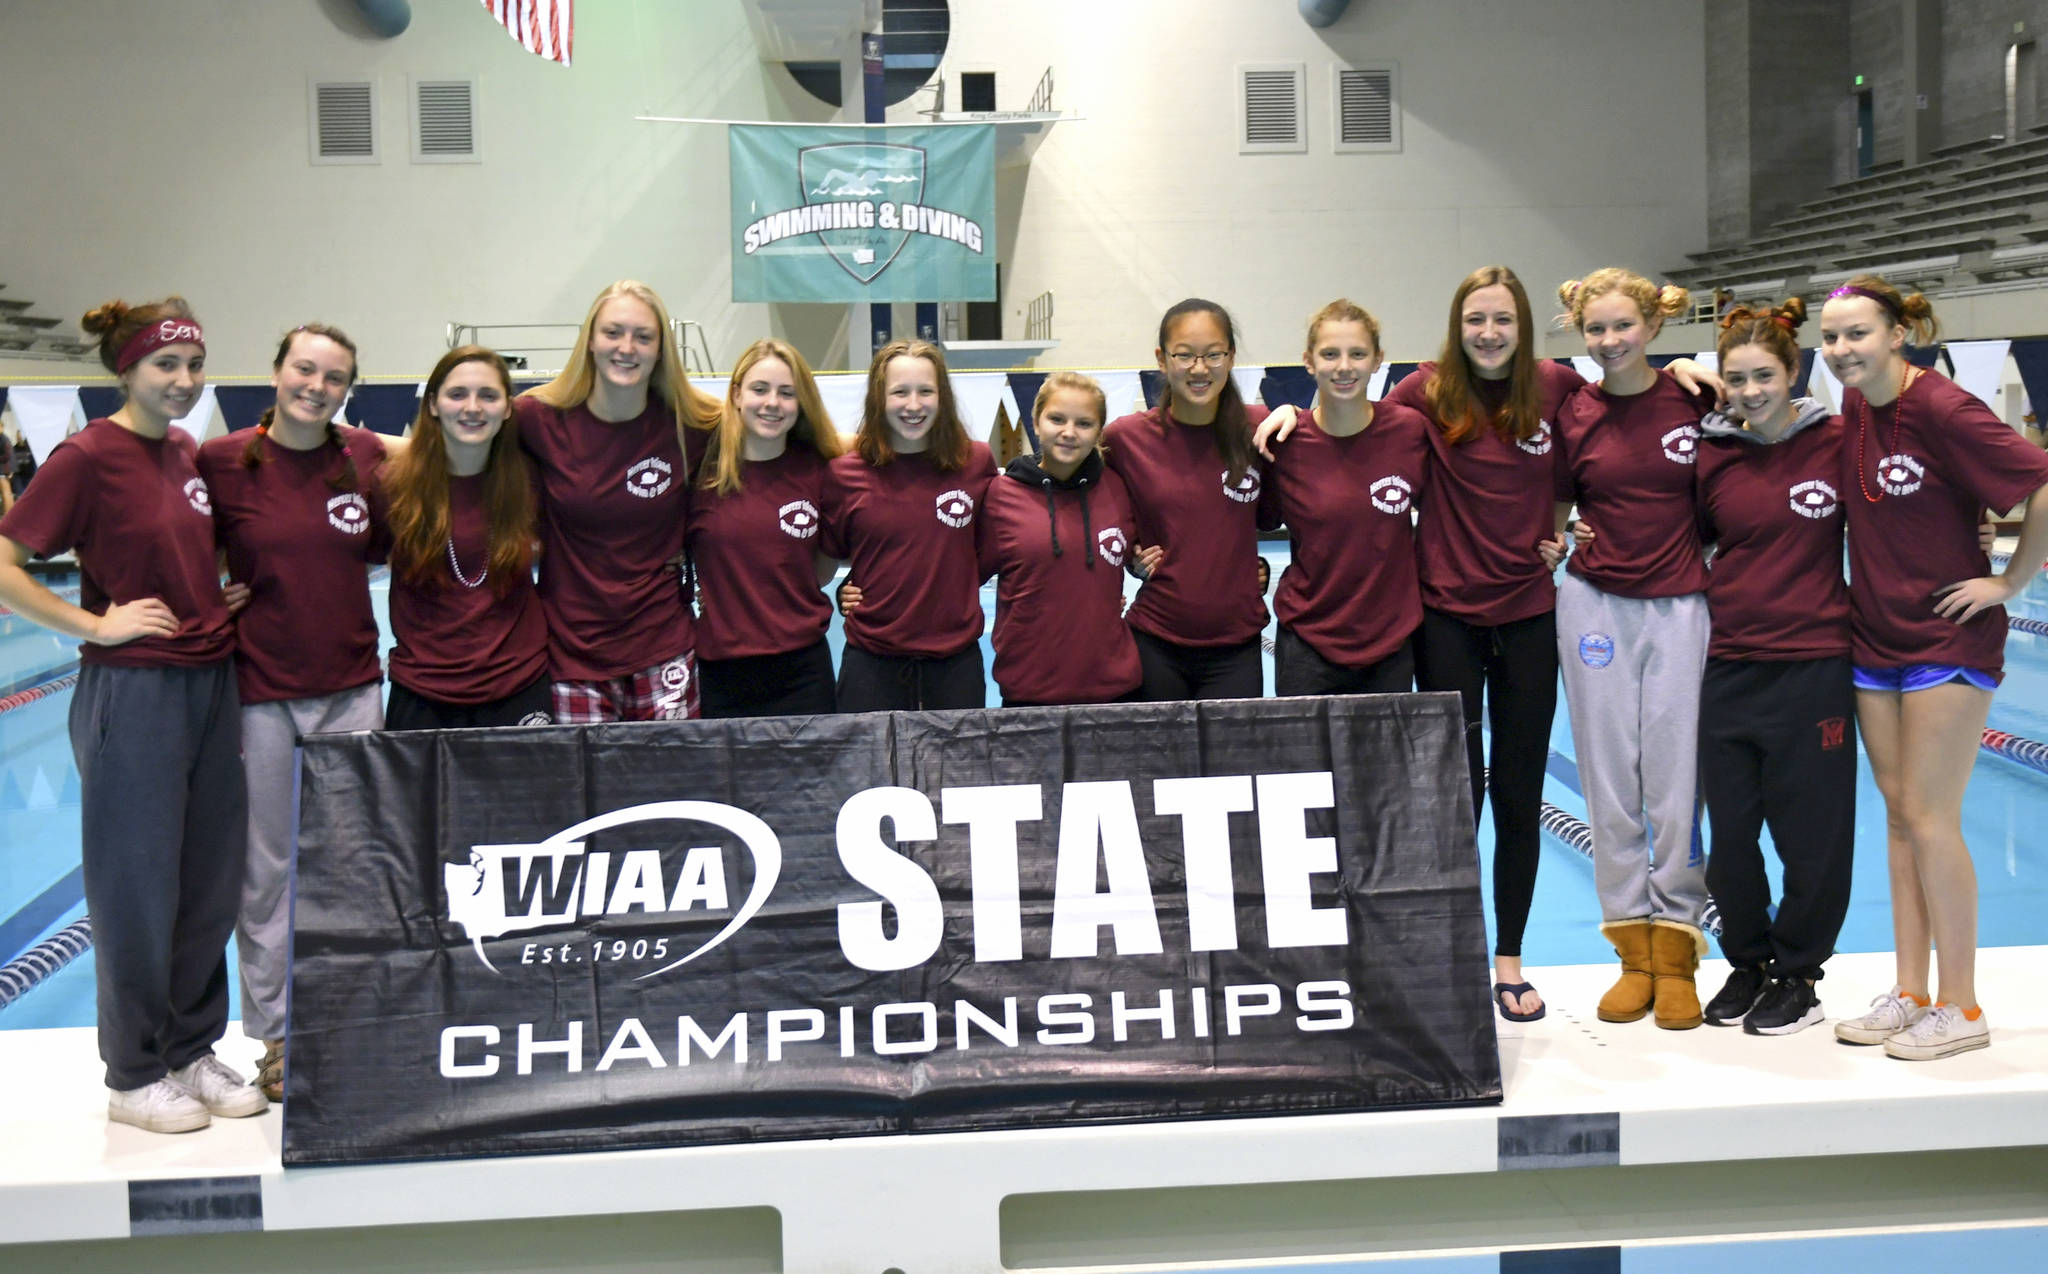 Photo courtesy of Allison Nelson                                The Mercer Island Islanders girls swim squad registered a fourth place finish at the Class 3A state swim meet on Nov. 11 at the King County Aquatic Center in Federal Way. The Islanders compiled 180 team points. Mercer Island junior Annie Pearse earned second place in the 50 free with a time of 24.36 and captured seventh place in the 100 free clocking a time of 53.83. Alexa Williams finished in 11th place in the 100 backstroke with a time of 1:00.55. Kai Williamson captured fourth place in the 100 backstroke with a time of 59.15. Islanders’ junior Sophia McGuffin earned fifth place in the 1-meter dive. Hailey Vandenbosch finished in 10th place in the 100 fly with a time of 59.85. Elizabeth Bailey earned 12th place in the 50-free with a time of 25.04 and 13th place in the 100 free with a time of 54.51. Chloe Mark took sixth place in the 500 free with a time of 5:13.5. Ellie Williams finished in ninth place in the 500 free with a time of 5:17.01.                                RELAYS                                The 200 medley relay team of Kaitlyn Williamson, Grace Olsen, Hailey Vandenbosch and Ellie Williams captured sixth place with a time of 1:52.44. The 200 free relay squad consisting of Annie Pearse, Julia Williamson, Elizabeth Bailey and Ellie Williams earned seventh place with a time of 1:40.35. The 400 free relay team of Annie Pearse, Hailey Vandenbosch, Elizabeth Bailey and Julia Williamson nabbed a fifth place finish with a time of 3:37.76.